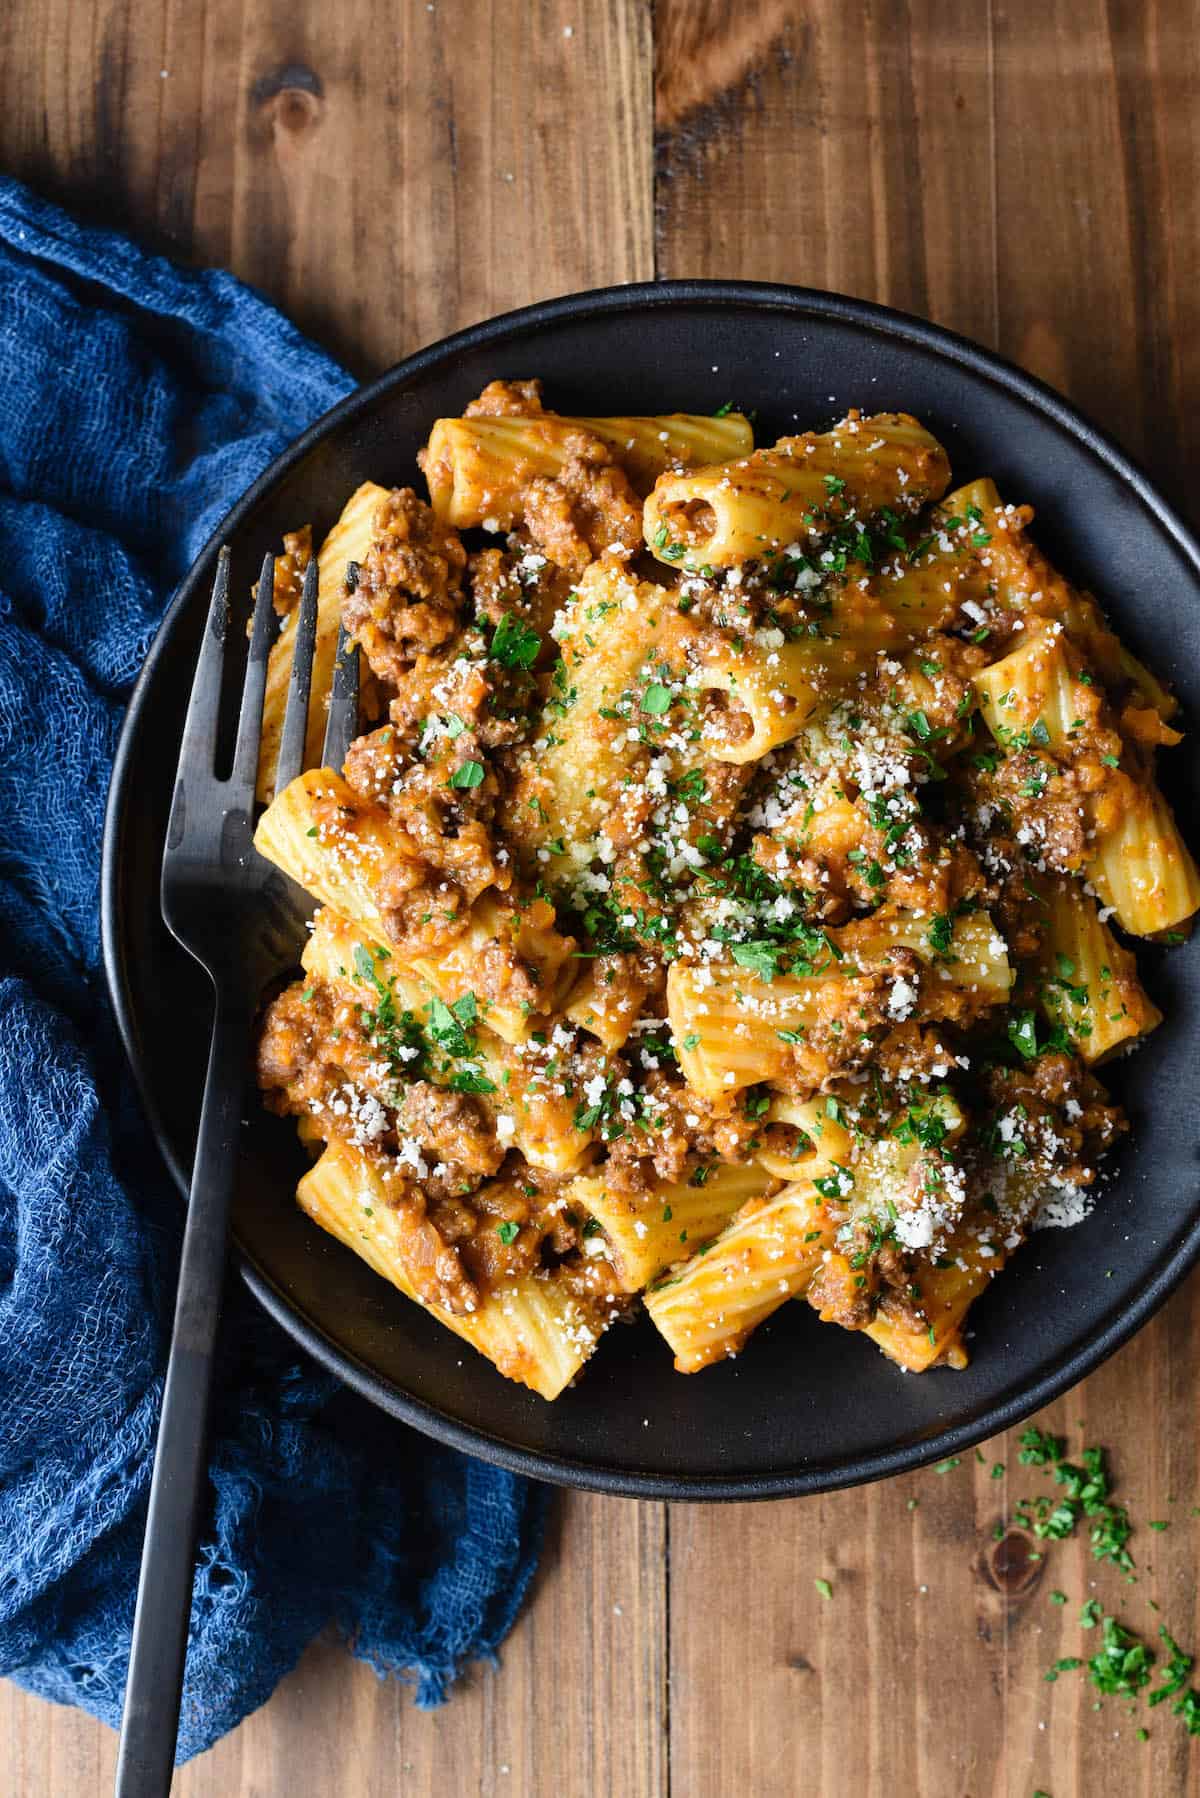 Overhead photo of rigatoni with meat sauce in black bowl, with black spoon and blue linen alongside.